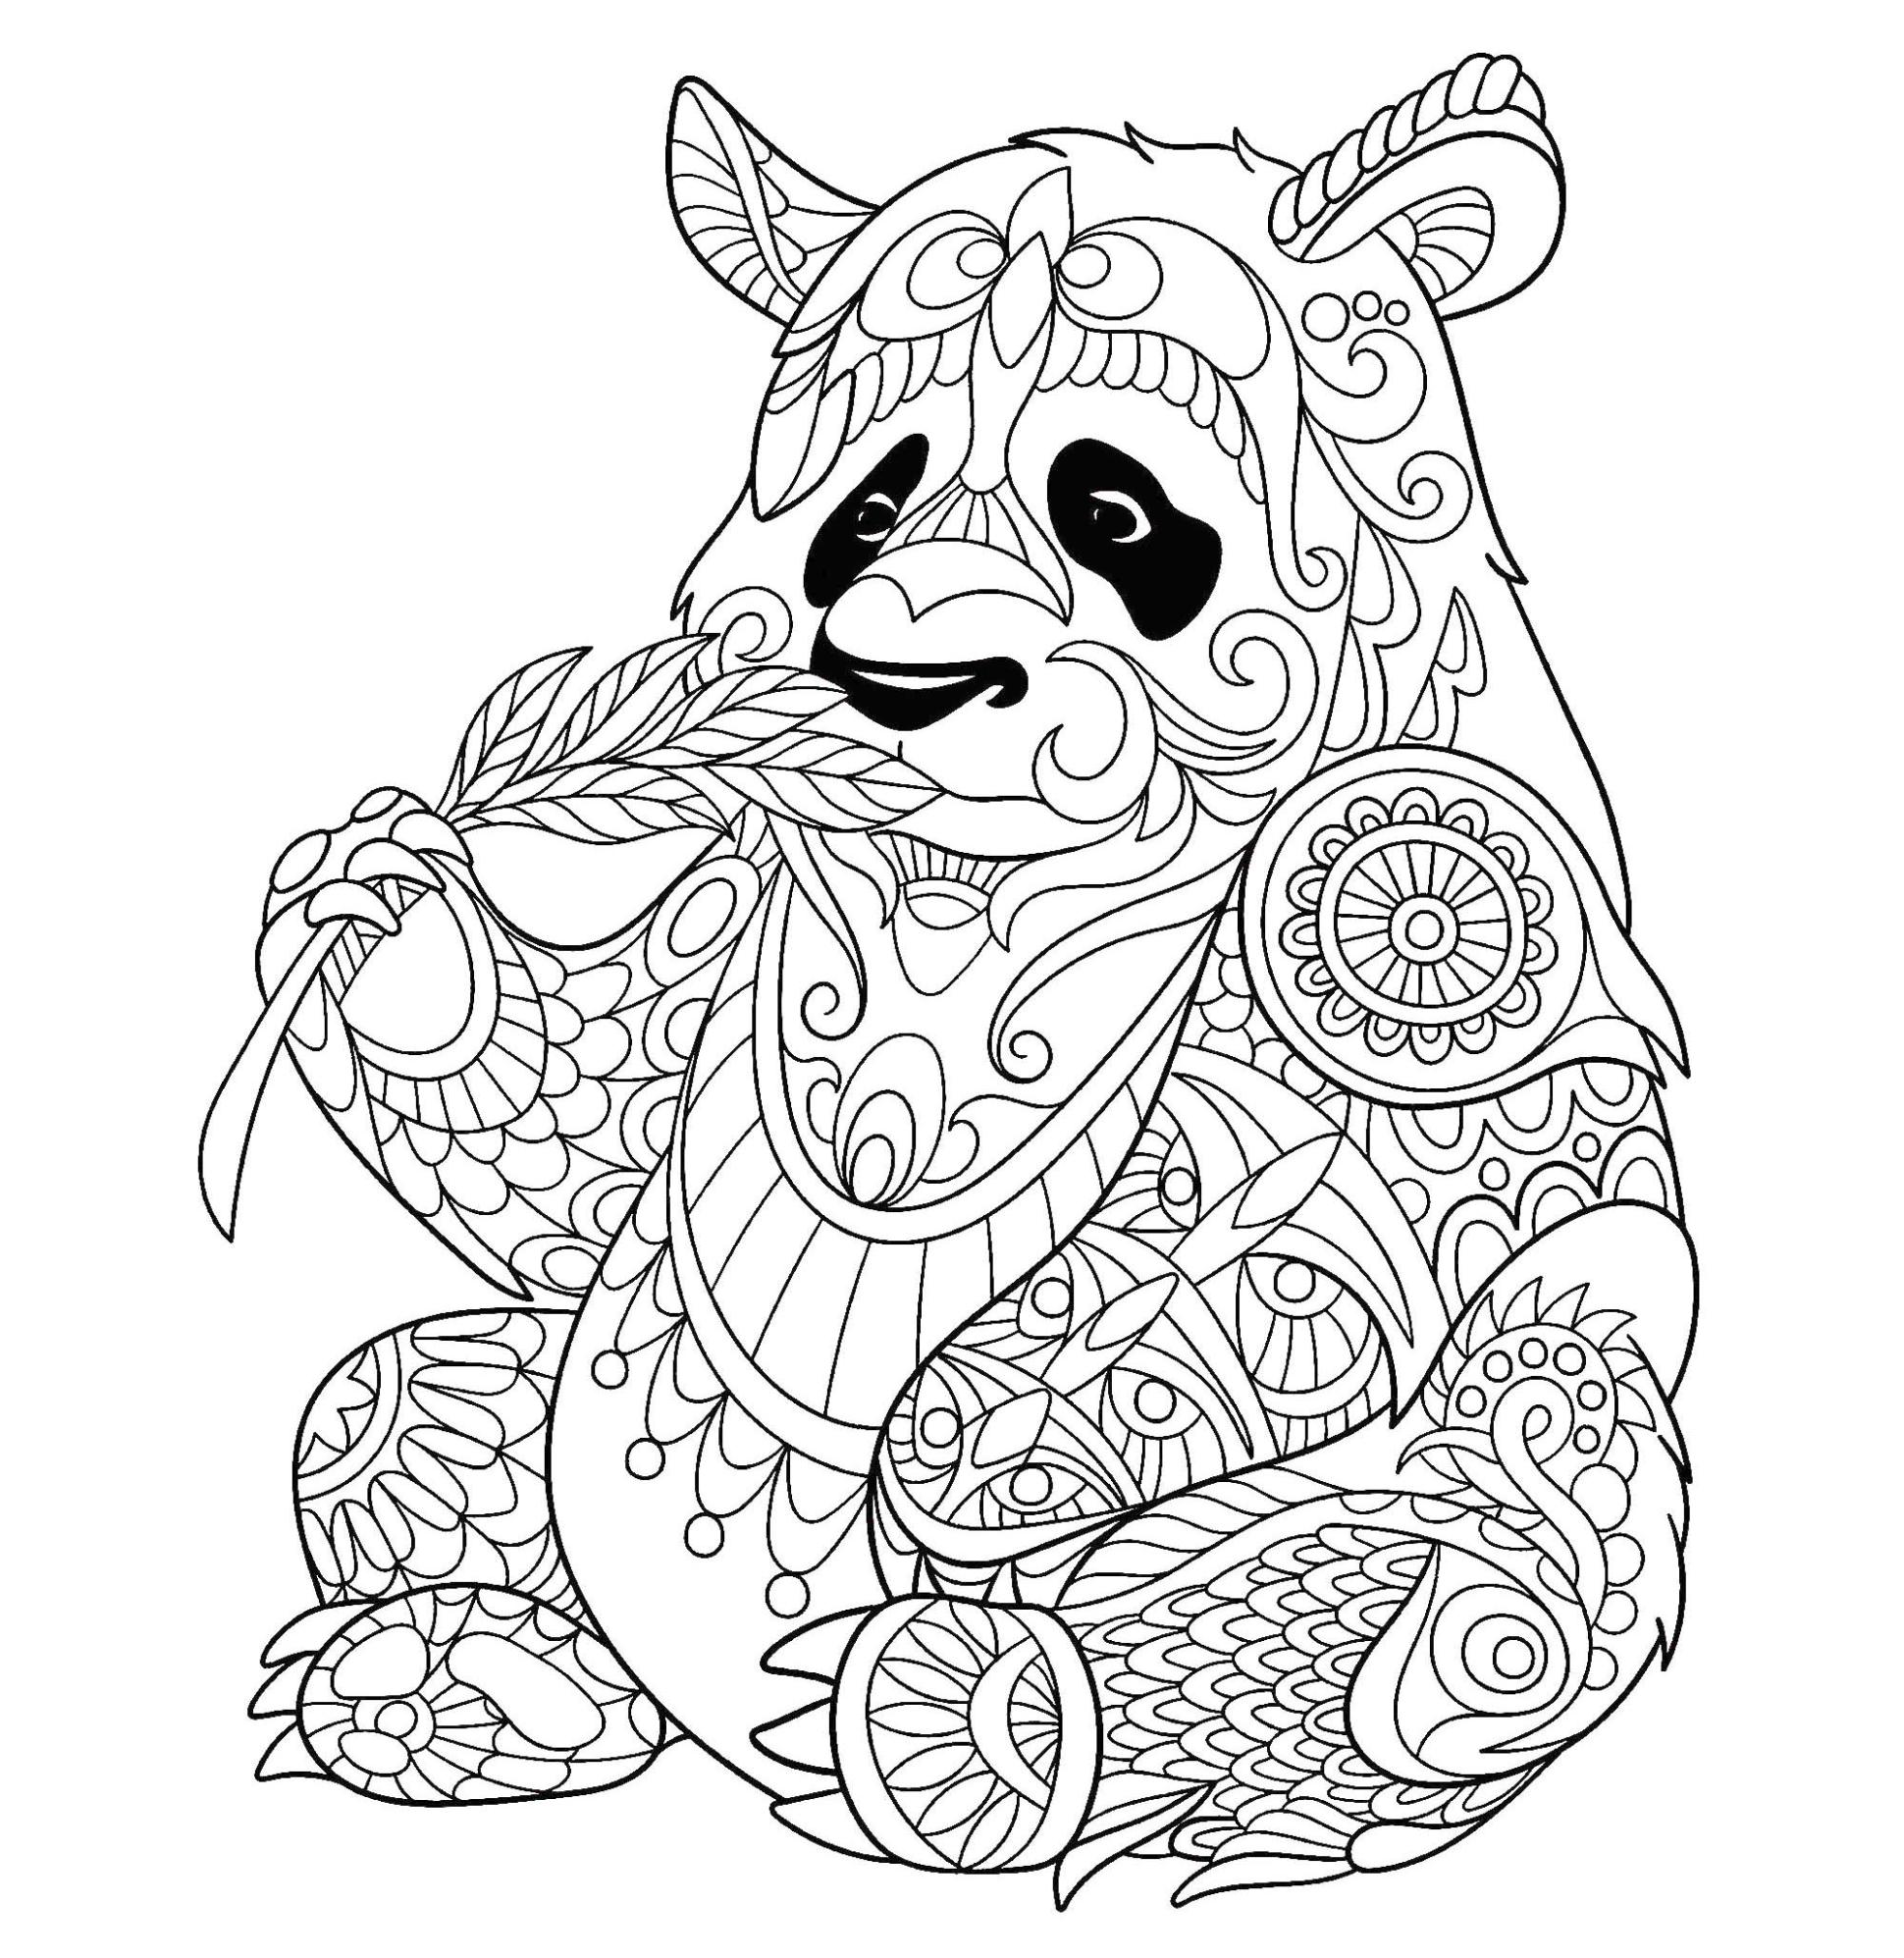 Get This Panda Coloring Pages Hard Coloring for Adults !